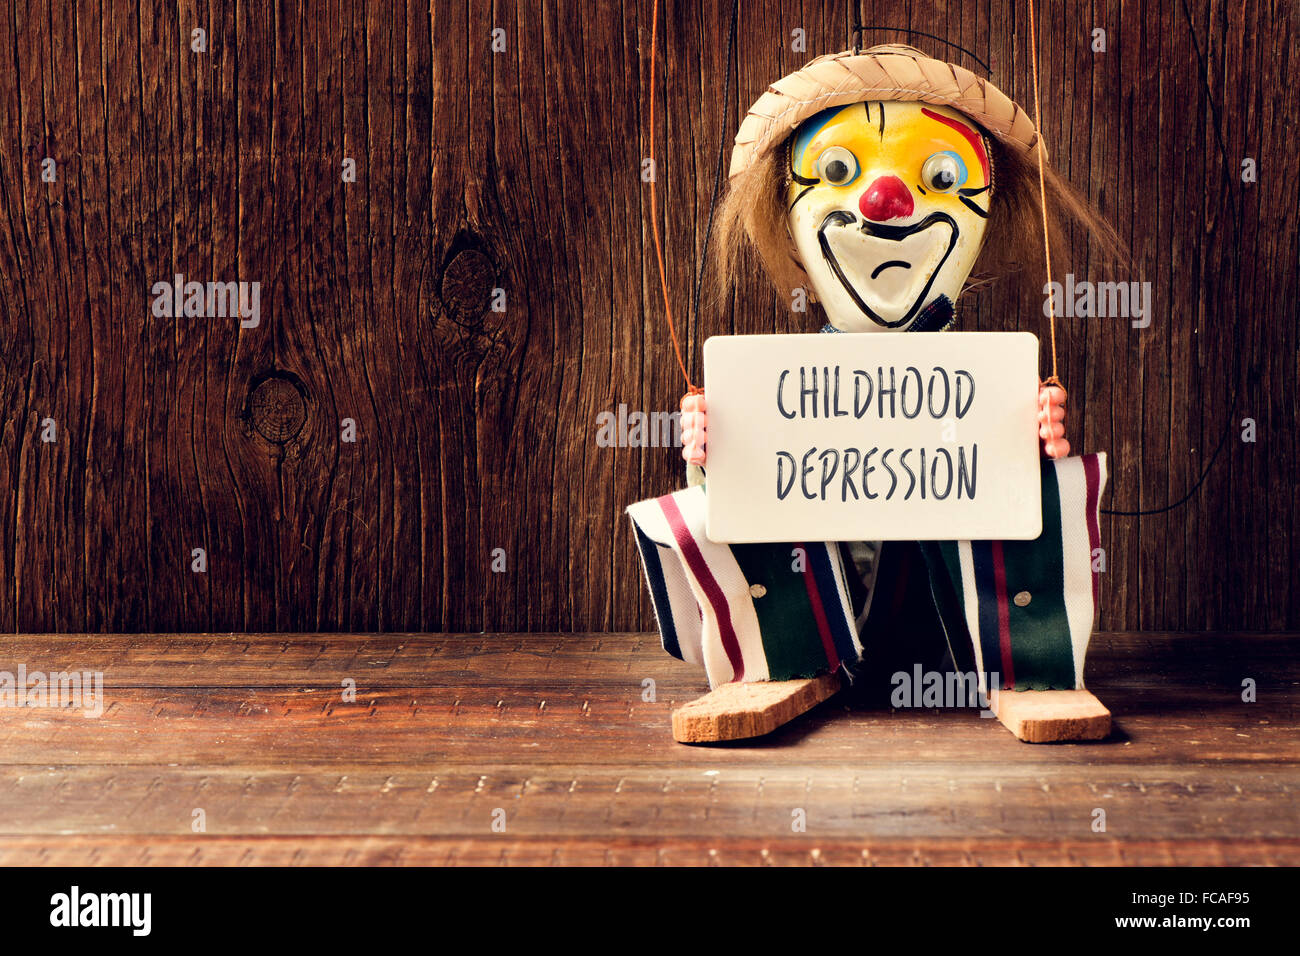 closeup of an old marionette with its face painted as a sad clown holding a signboard with the text childhood depression Stock Photo